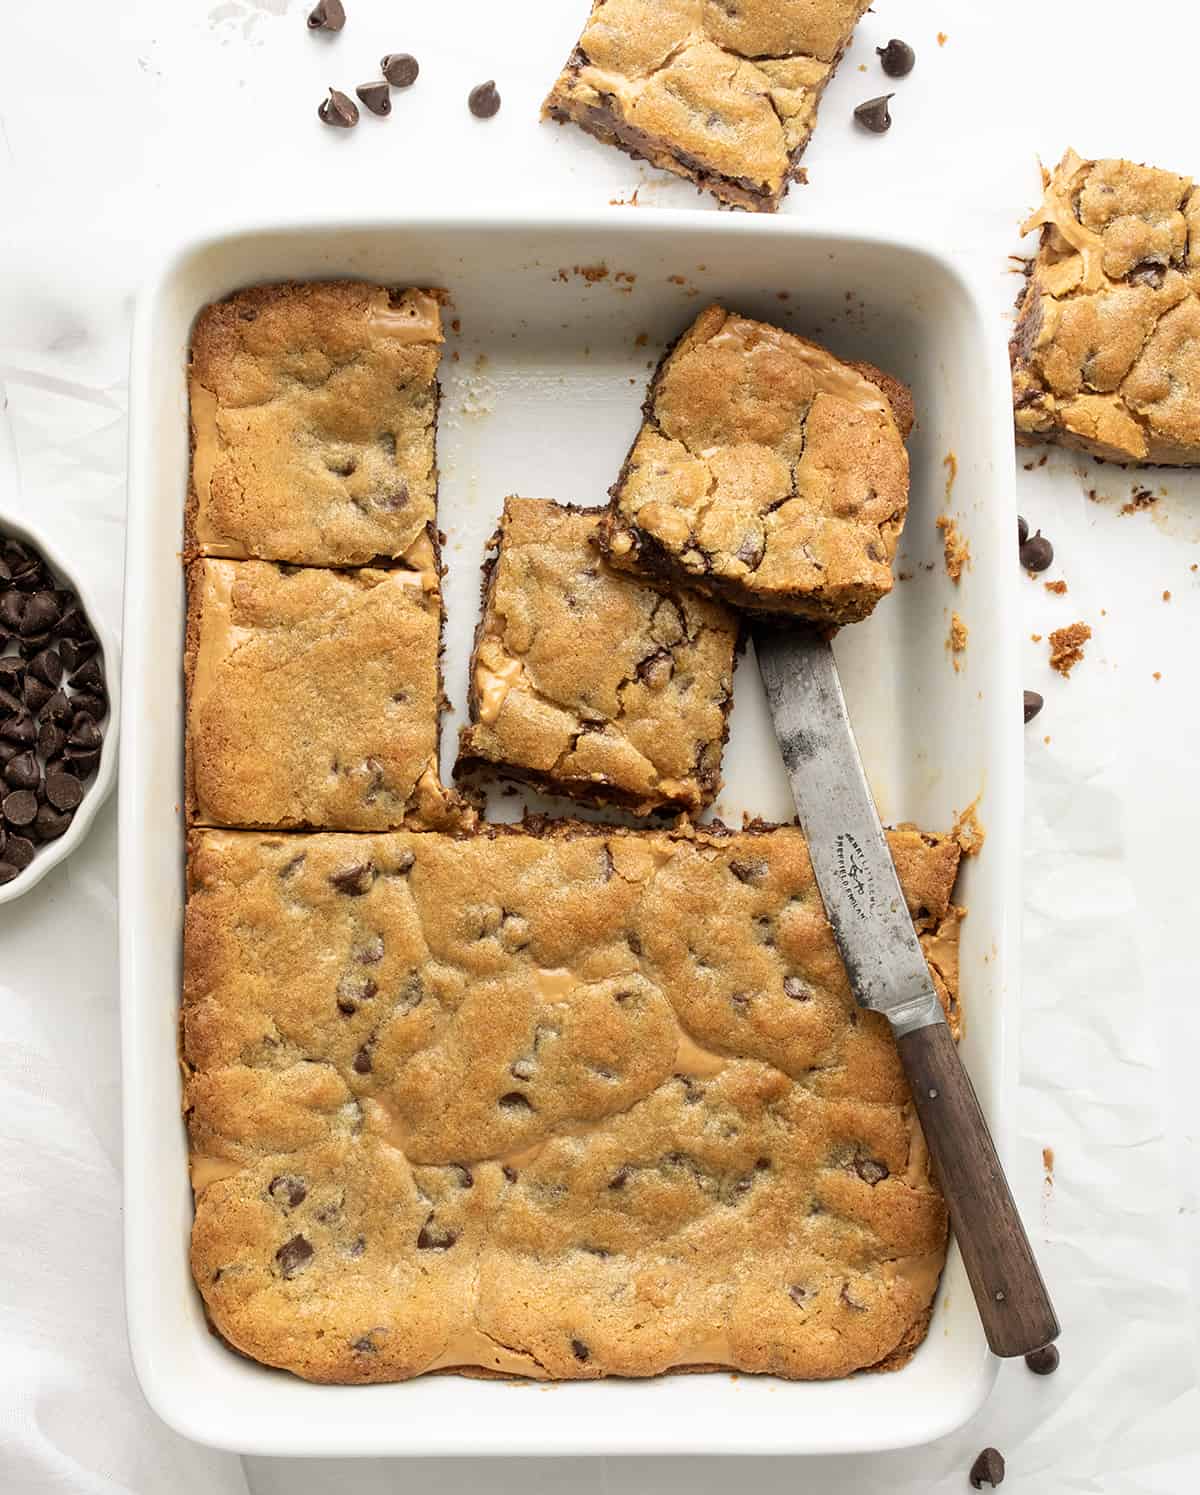 Peanut Butter Chocolate Chip Cookie Bars in a White Pan from Overhead with Some Bars Cut and Removed.